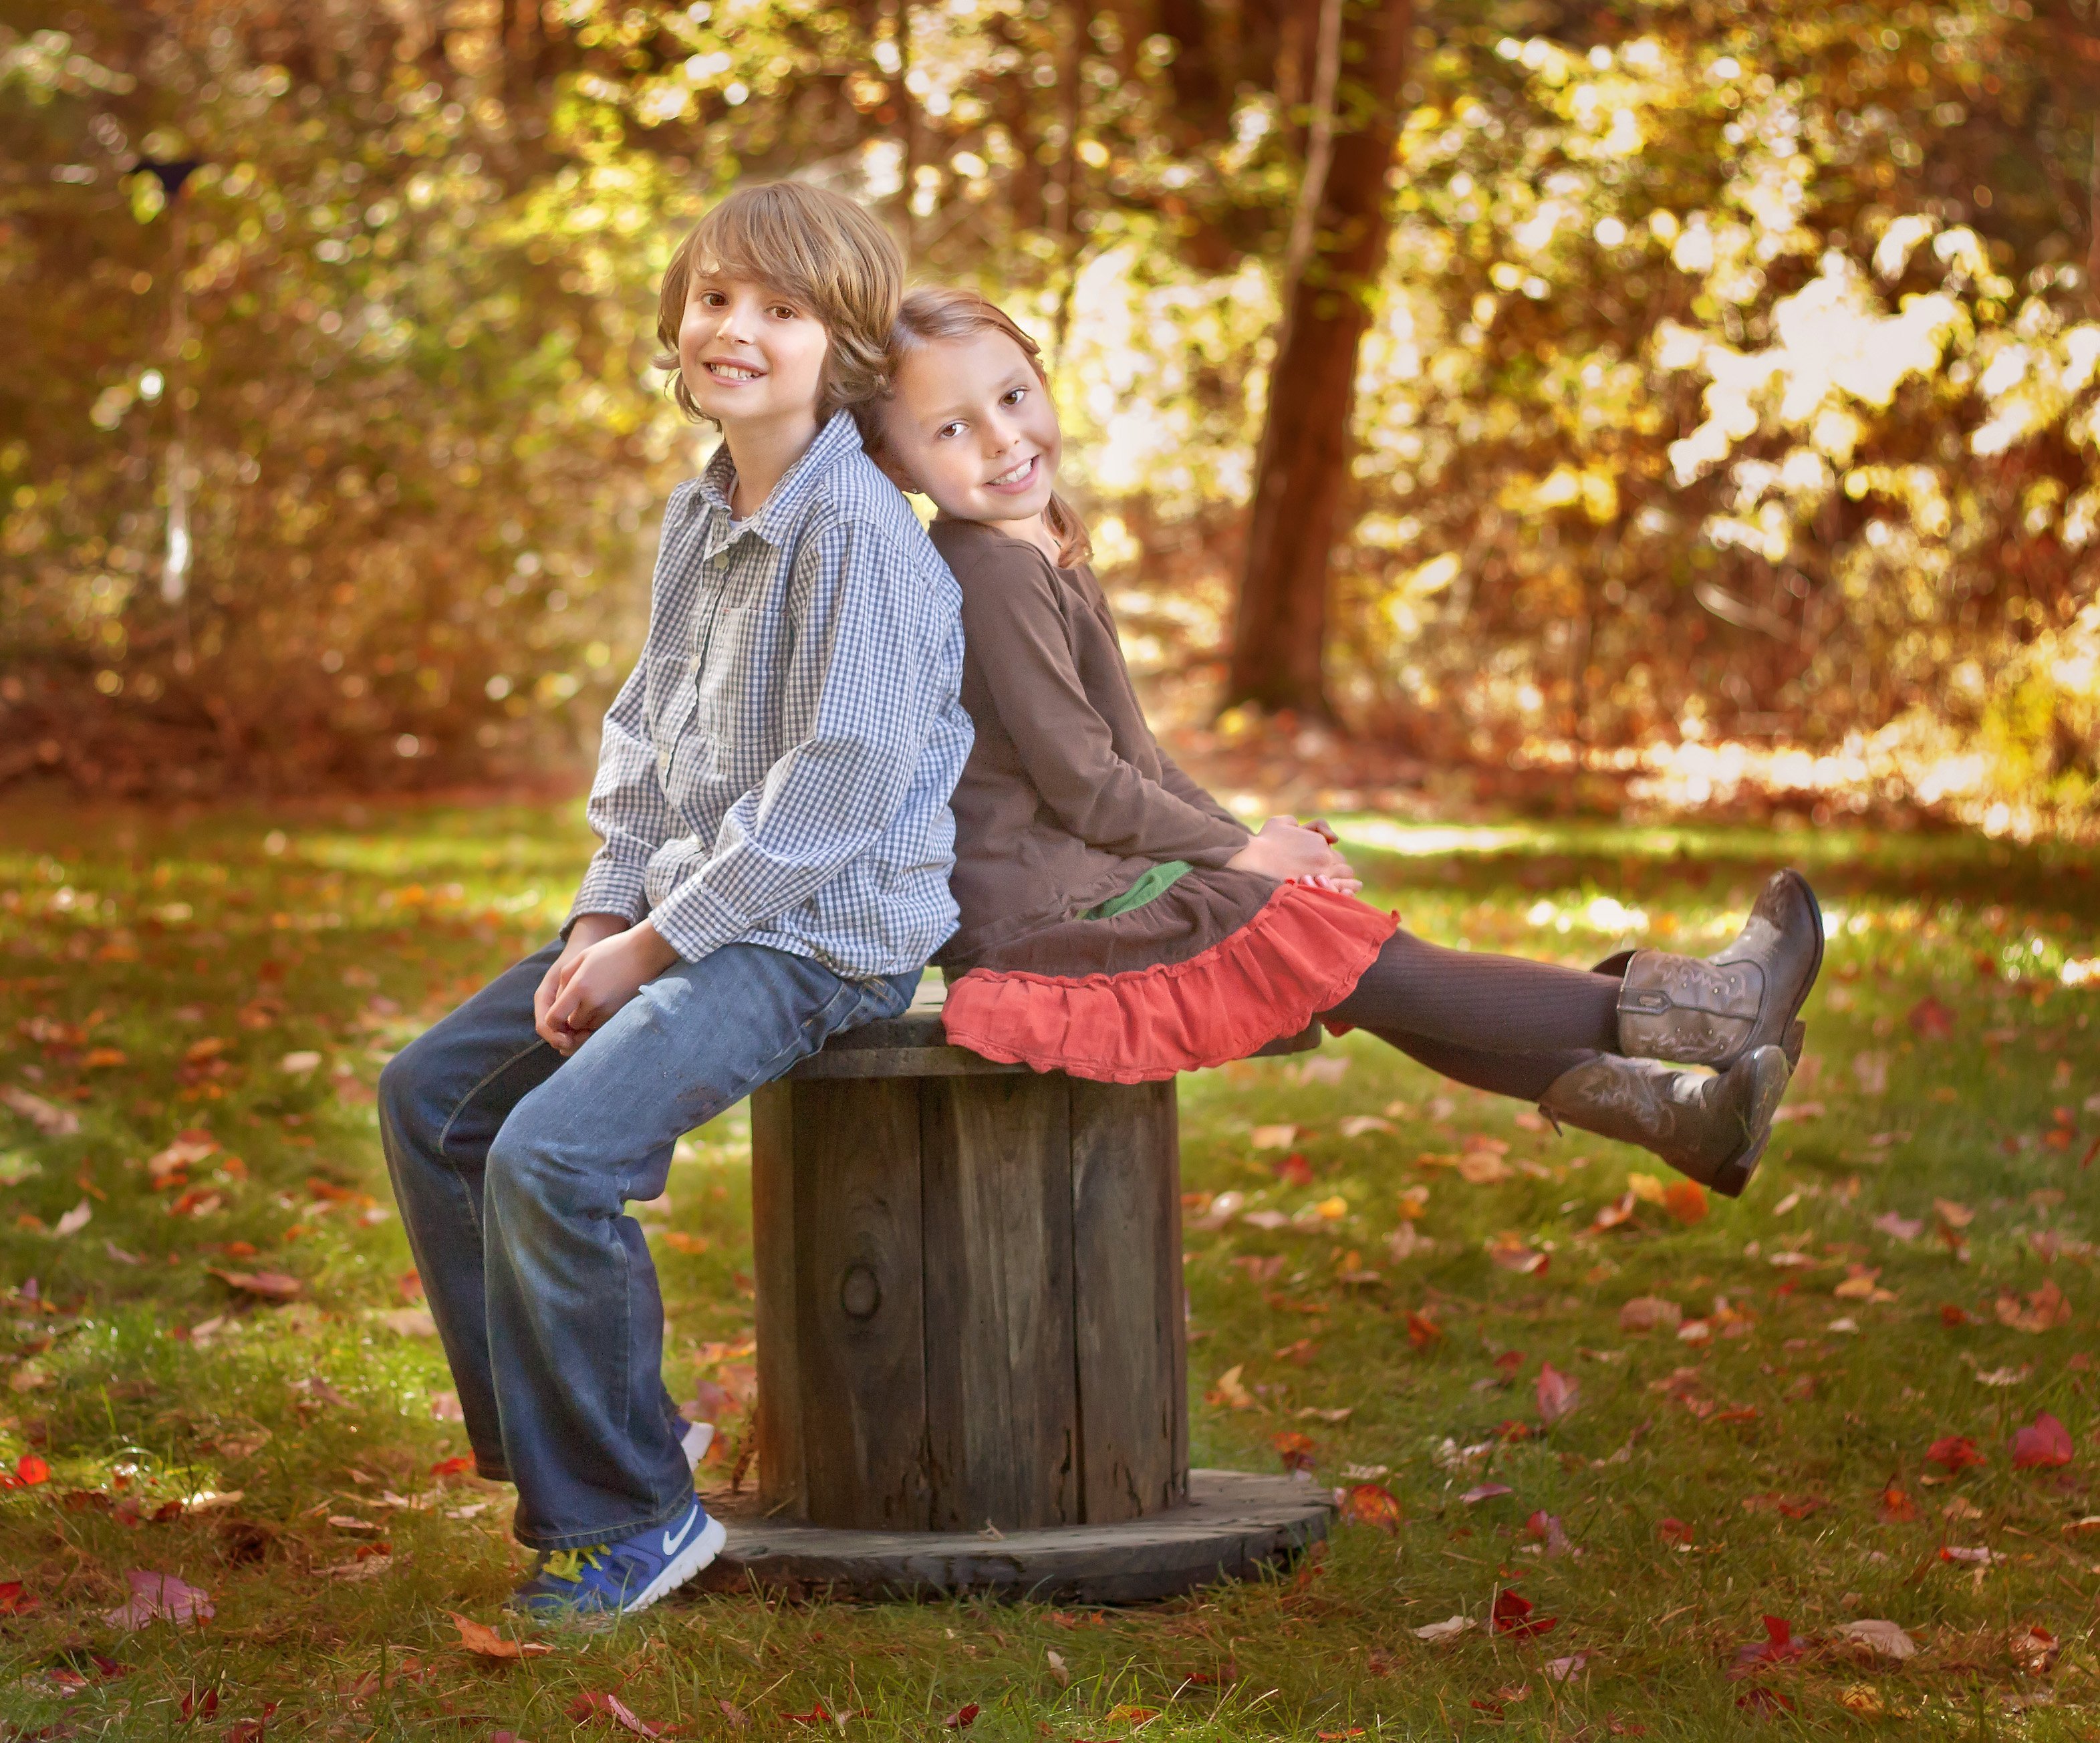 10 year-old son and 6-year old daughter posing on a spool in the fall